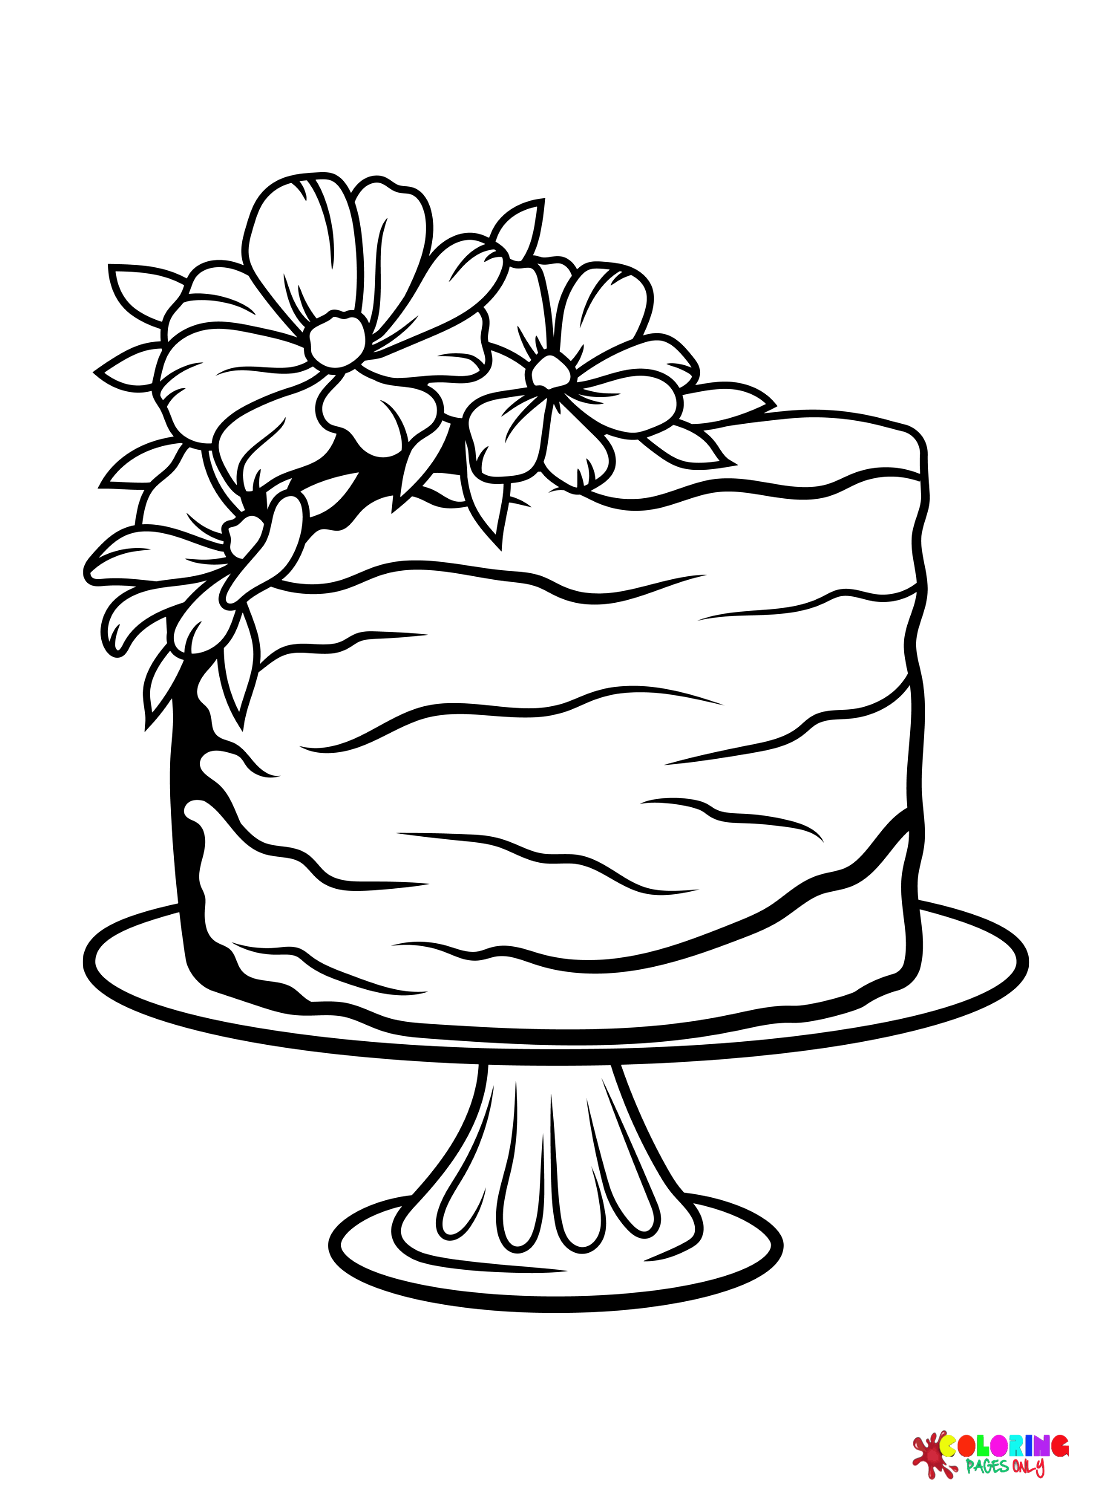 Wedding Cake to Print Coloring Page